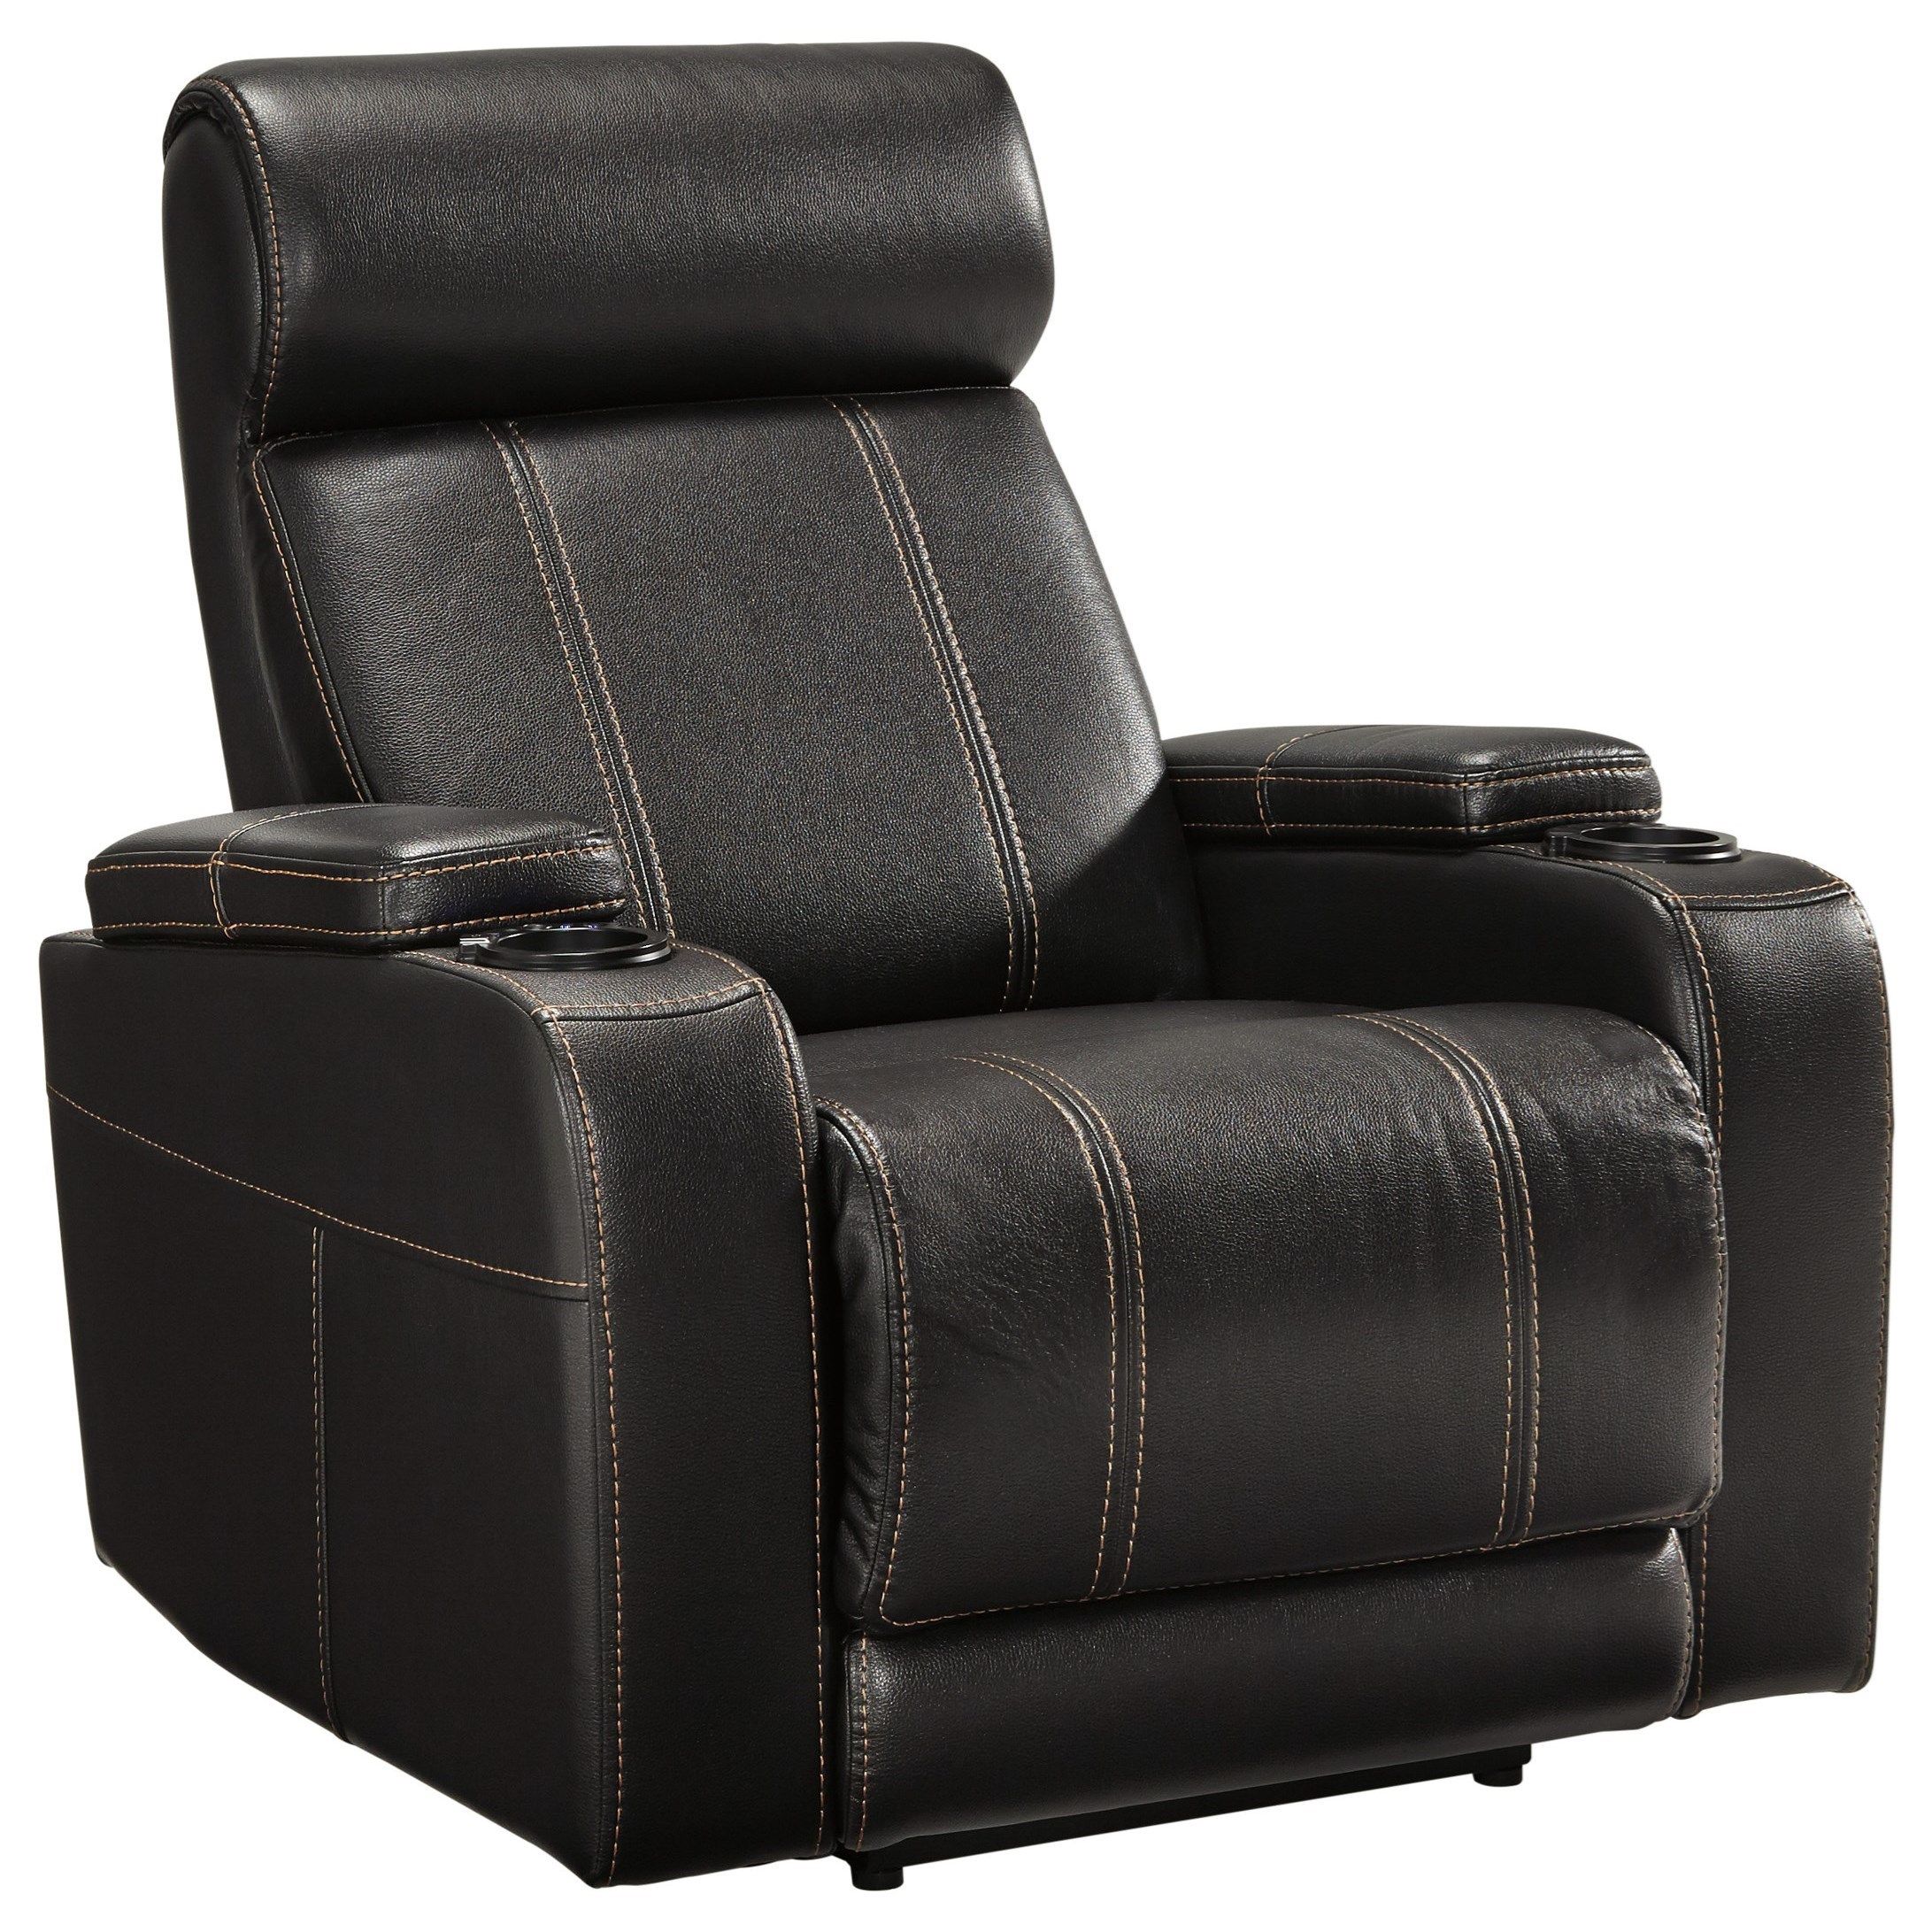 Signature Designashley Boyband Faux Leather Power Recliner With Cup Within Black Faux Leather Usb Charging Ottomans (View 6 of 20)